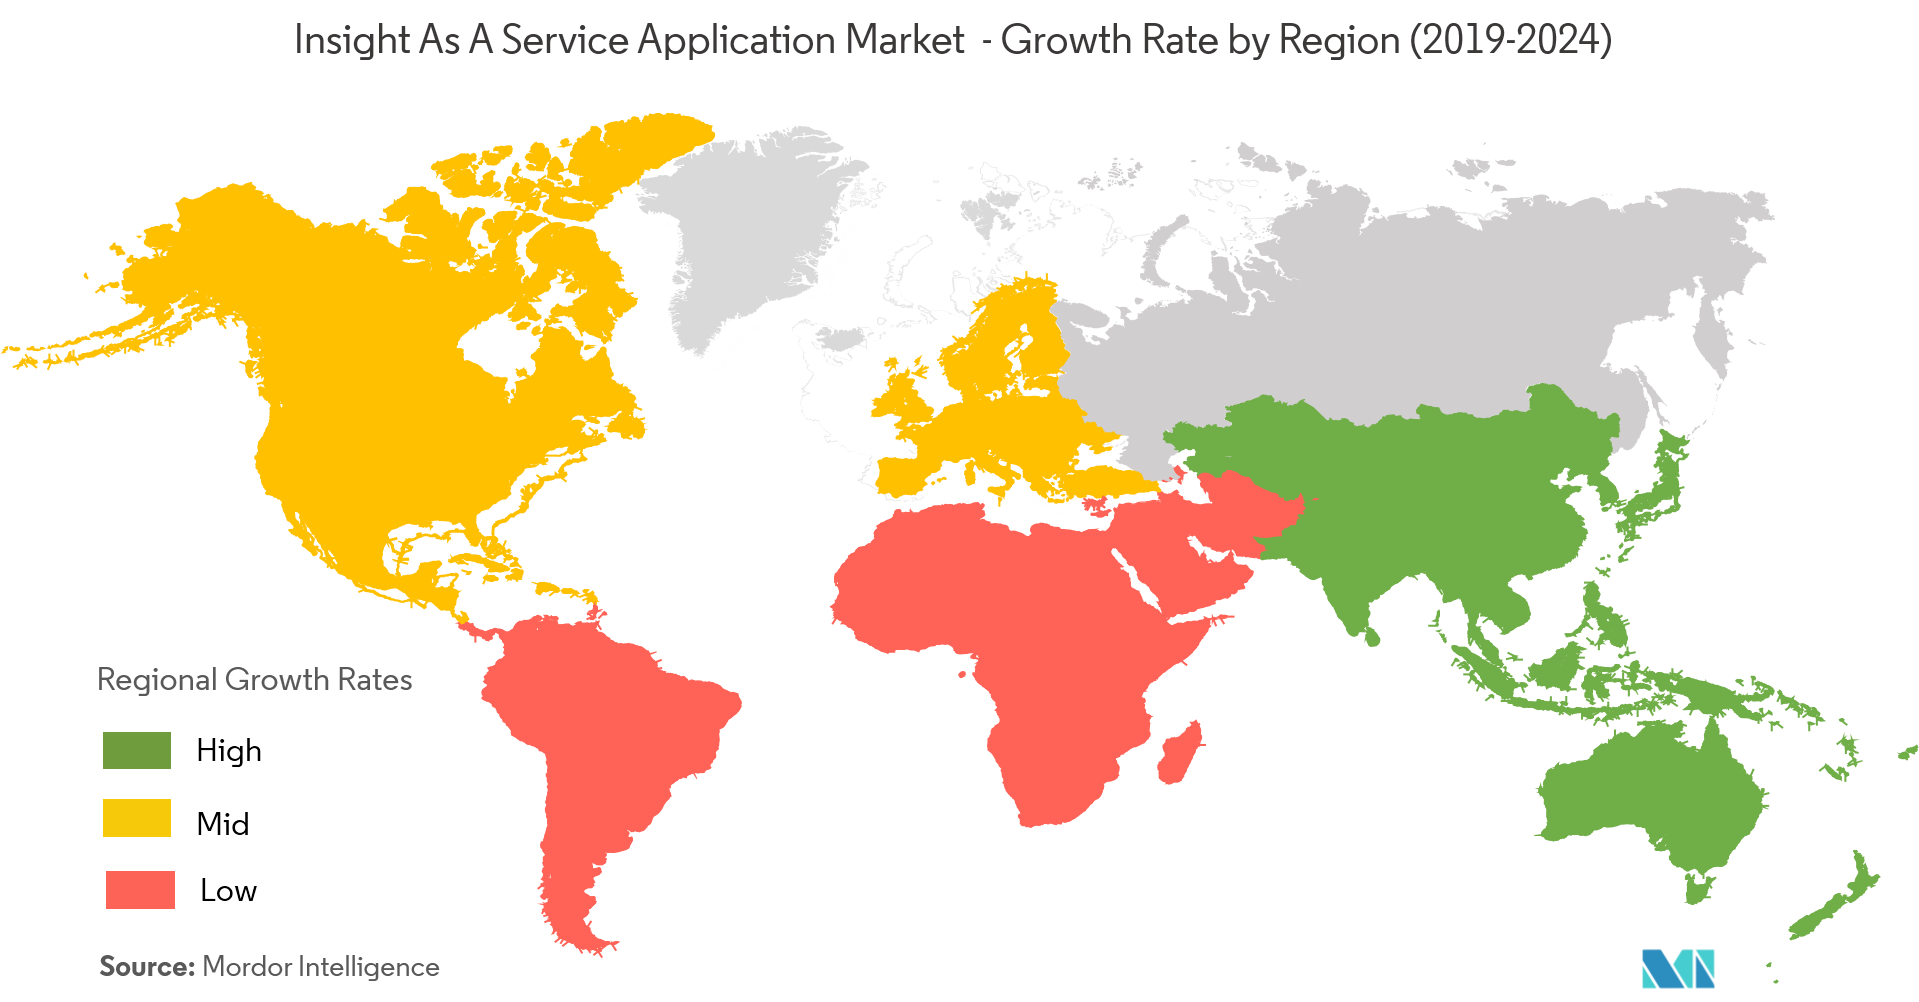 Insight as a Service Application Market Growth